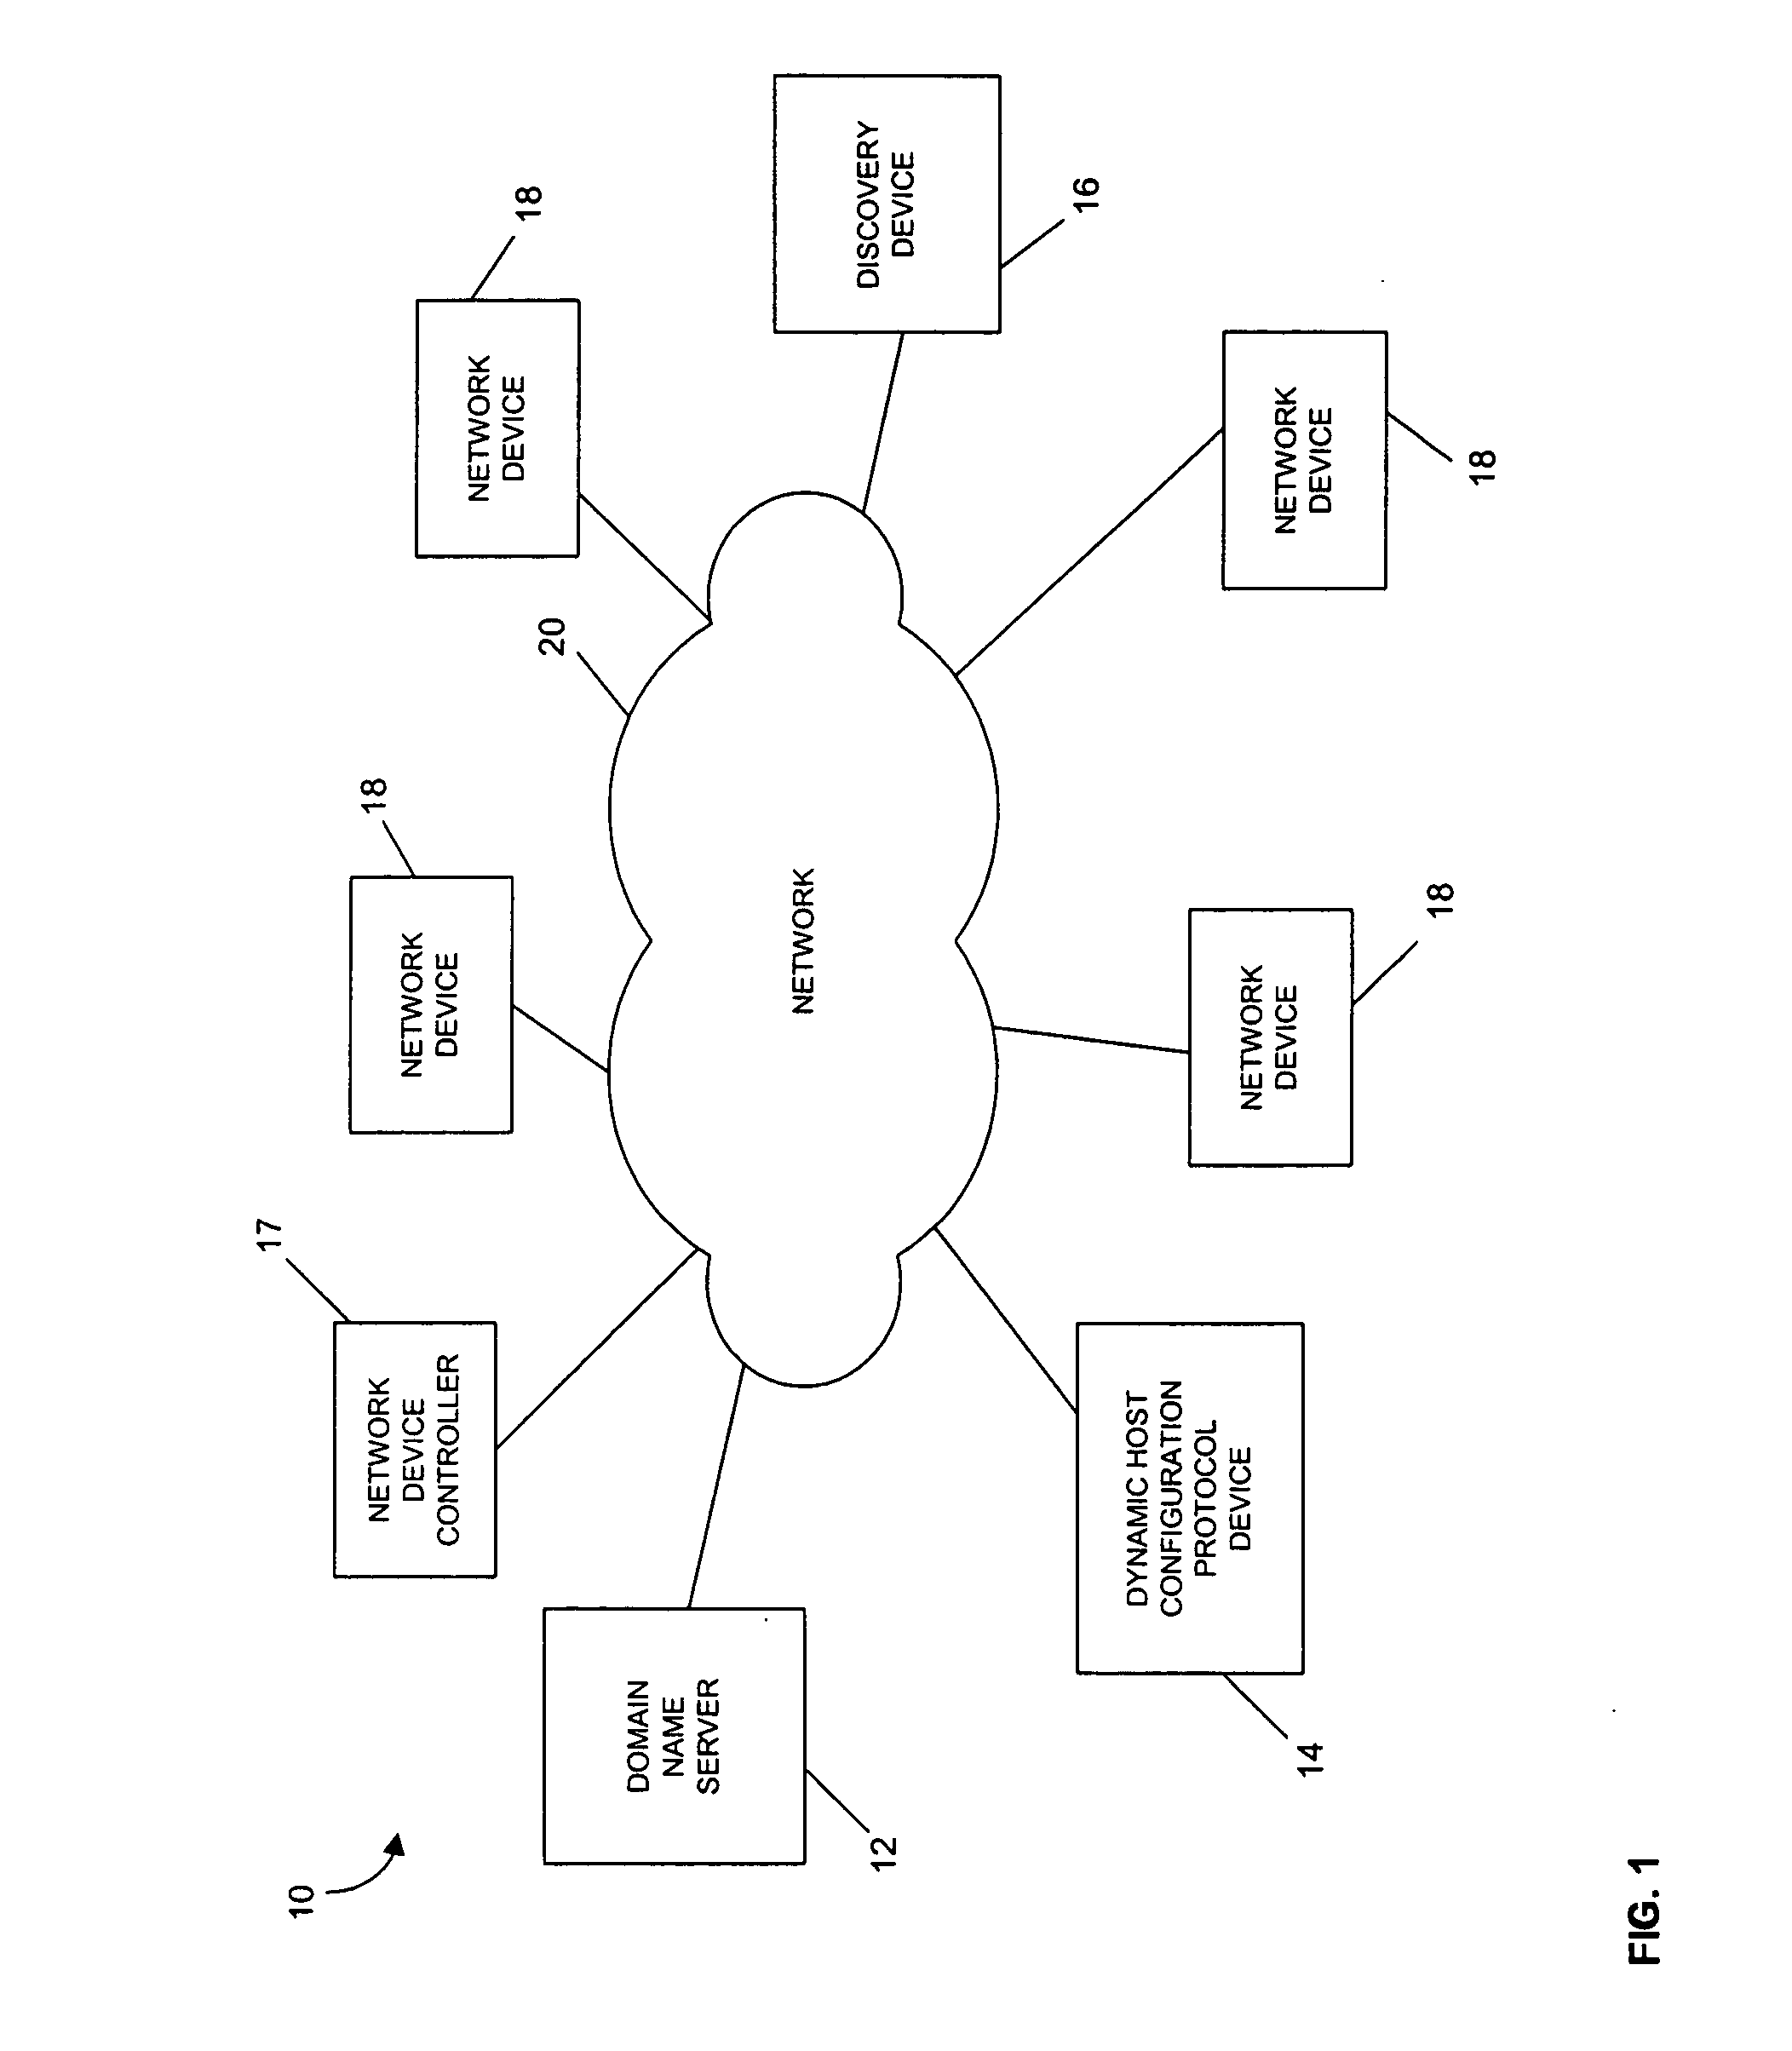 Methods and systems for discovering and configuring network devices